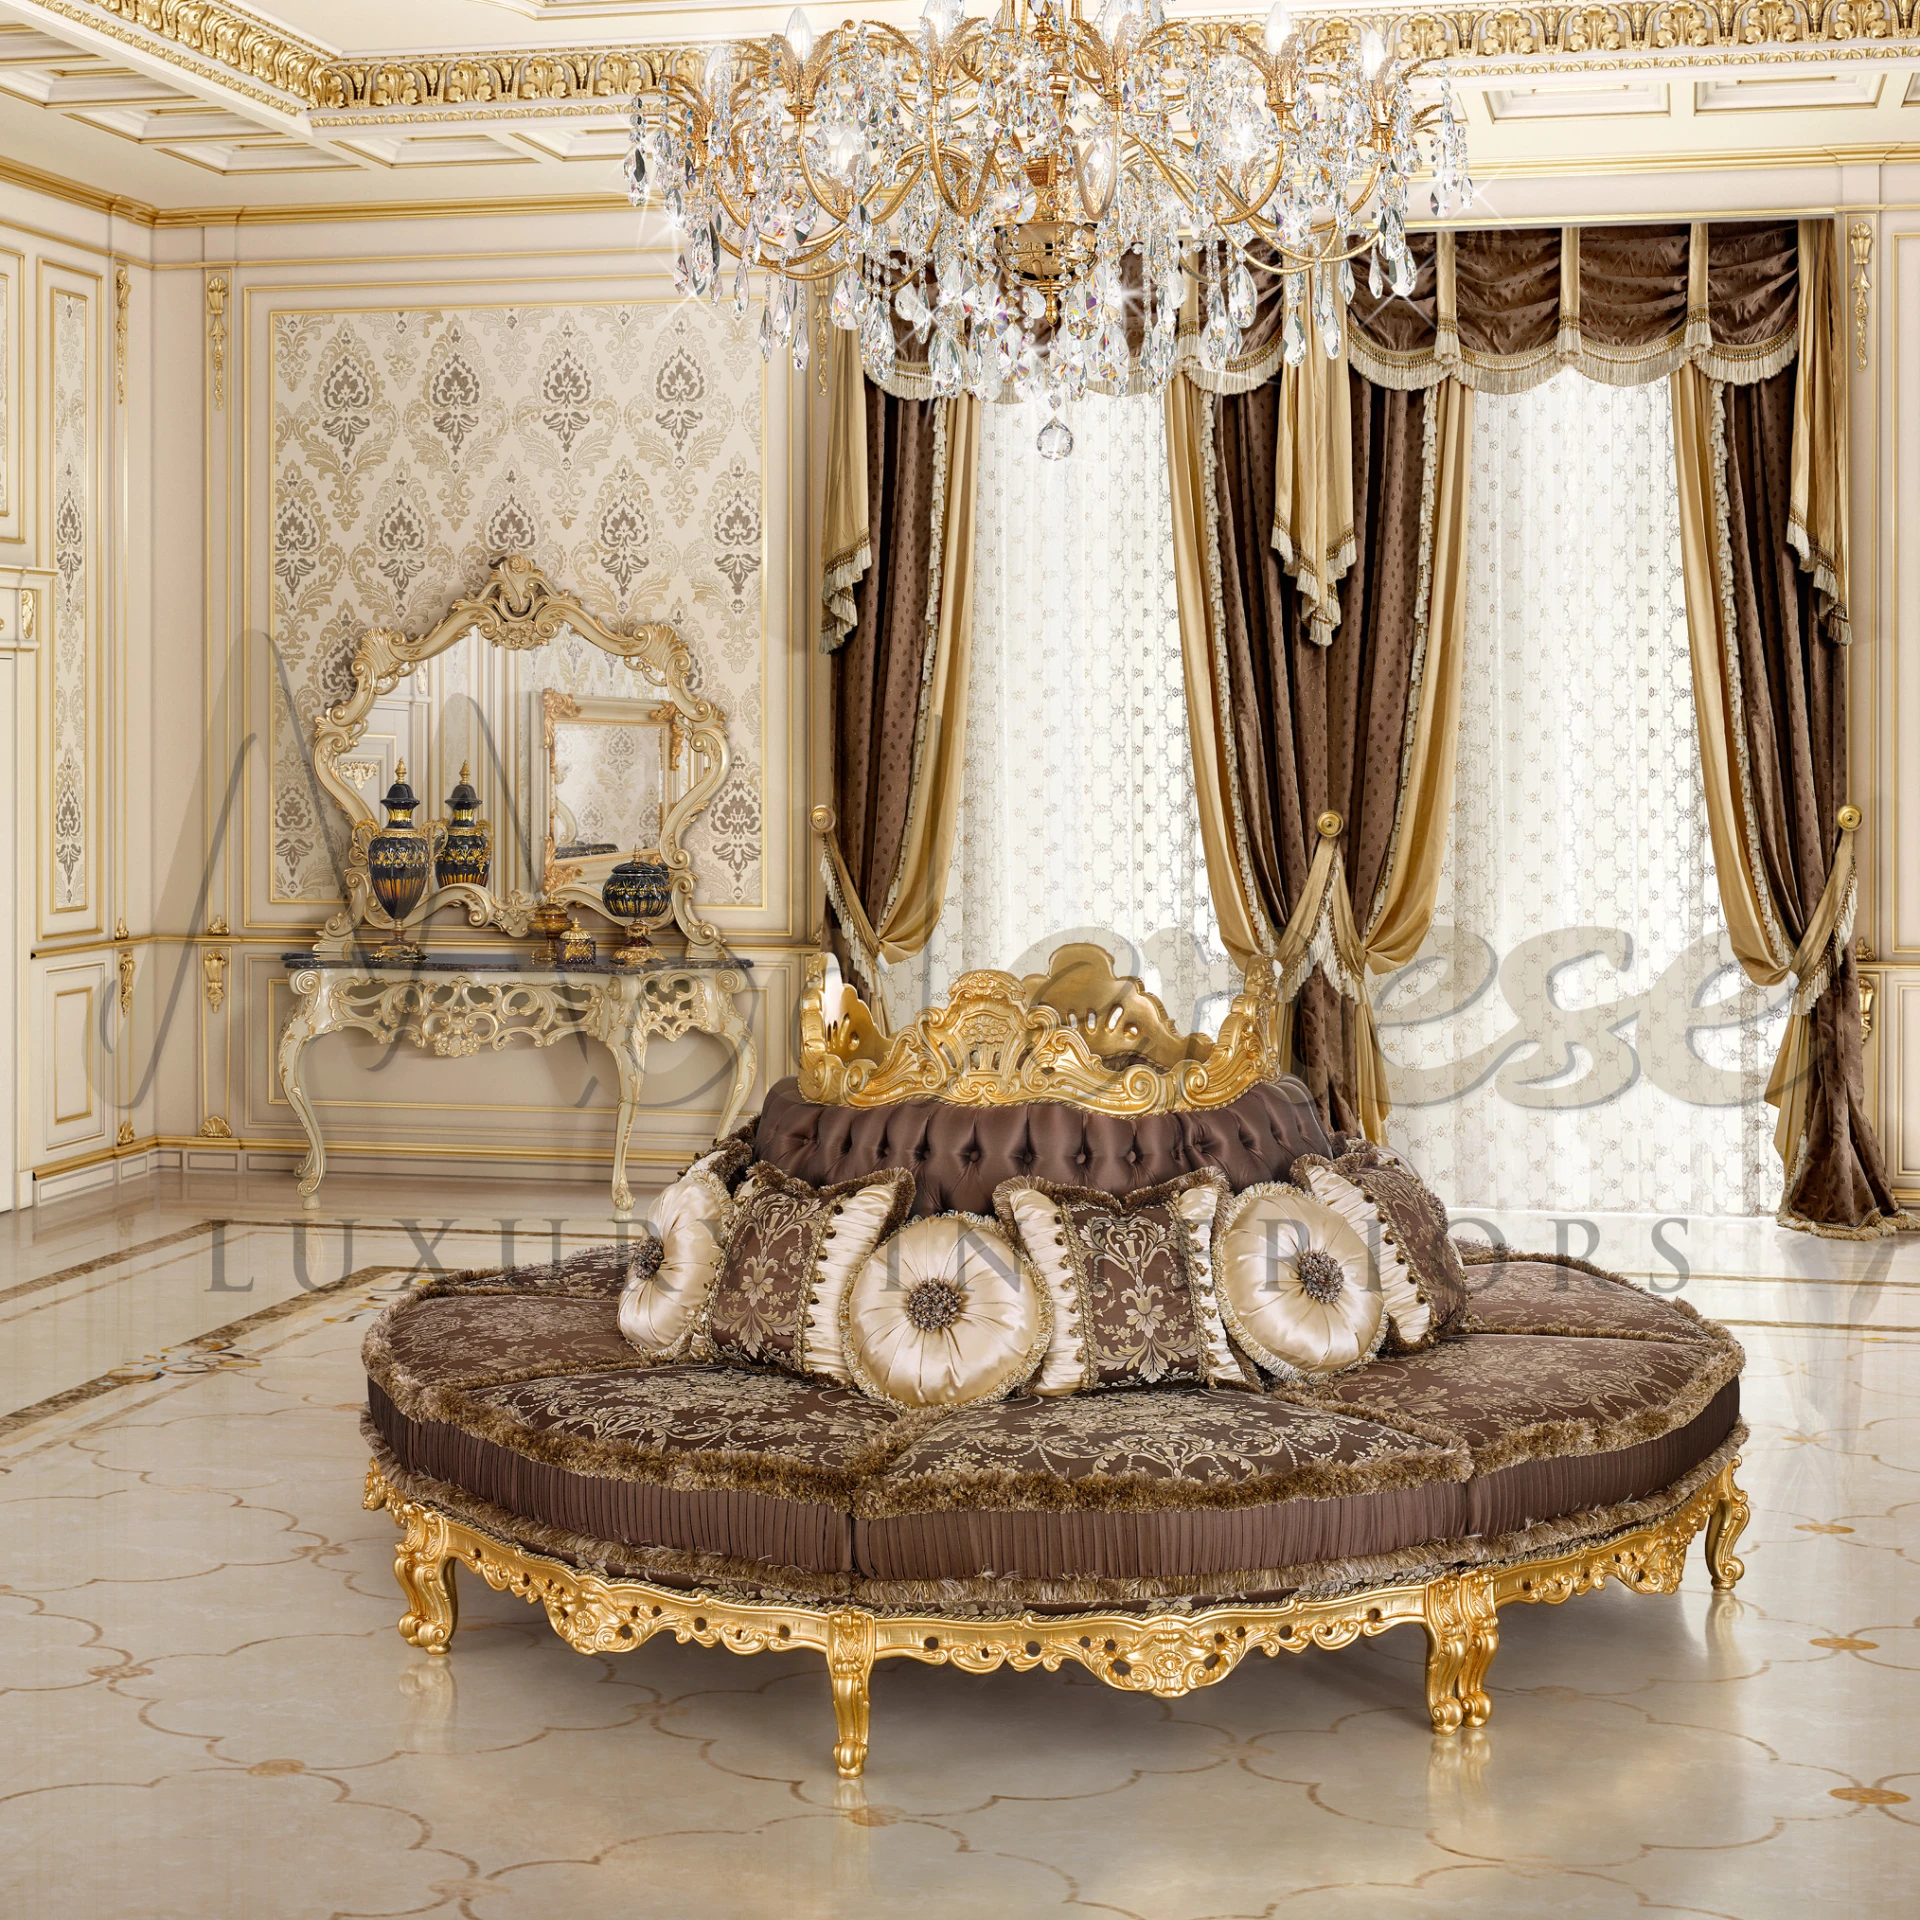 Opulent Victorian Round Sofa with brown pattern fabric, a revisited classic for a perfect luxury home centerpiece.